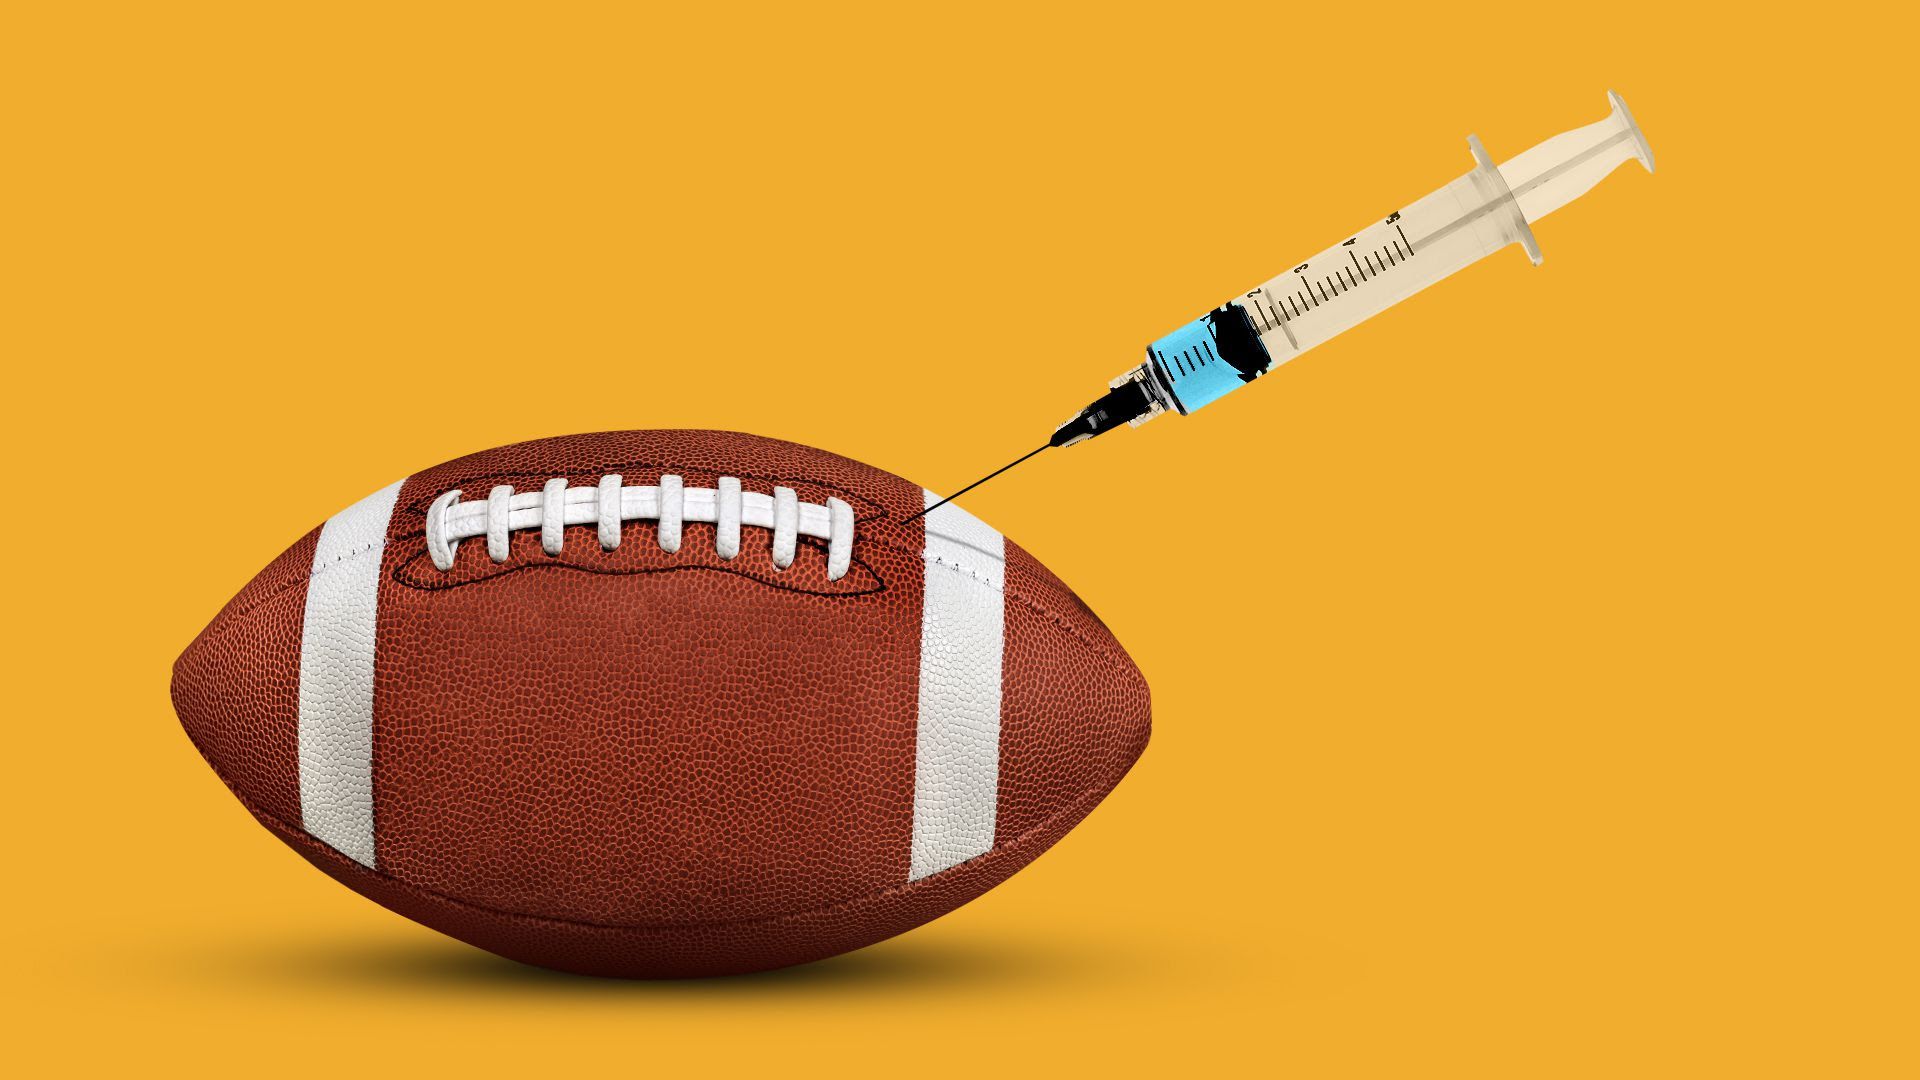 Soccer ball with a syringe